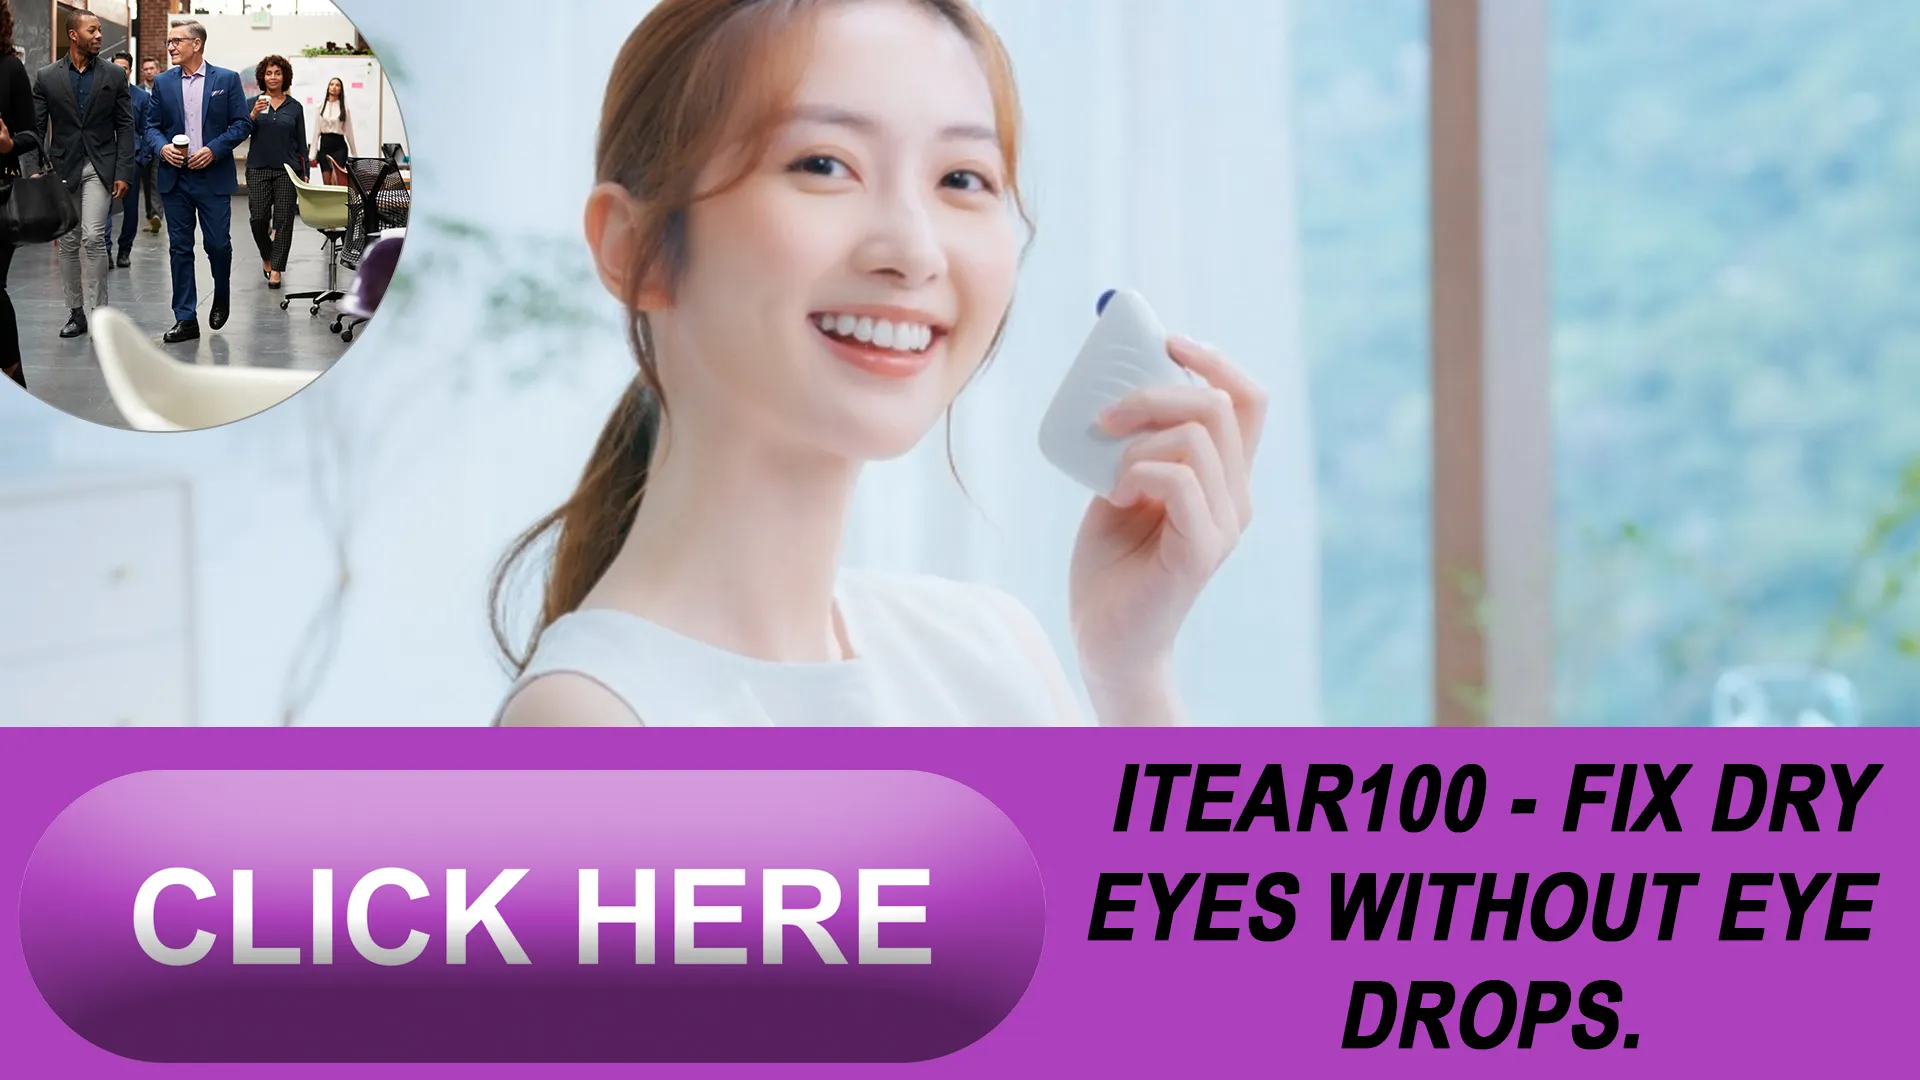 Tear-Inducing versus Messy Drops: The iTear100 Advantage